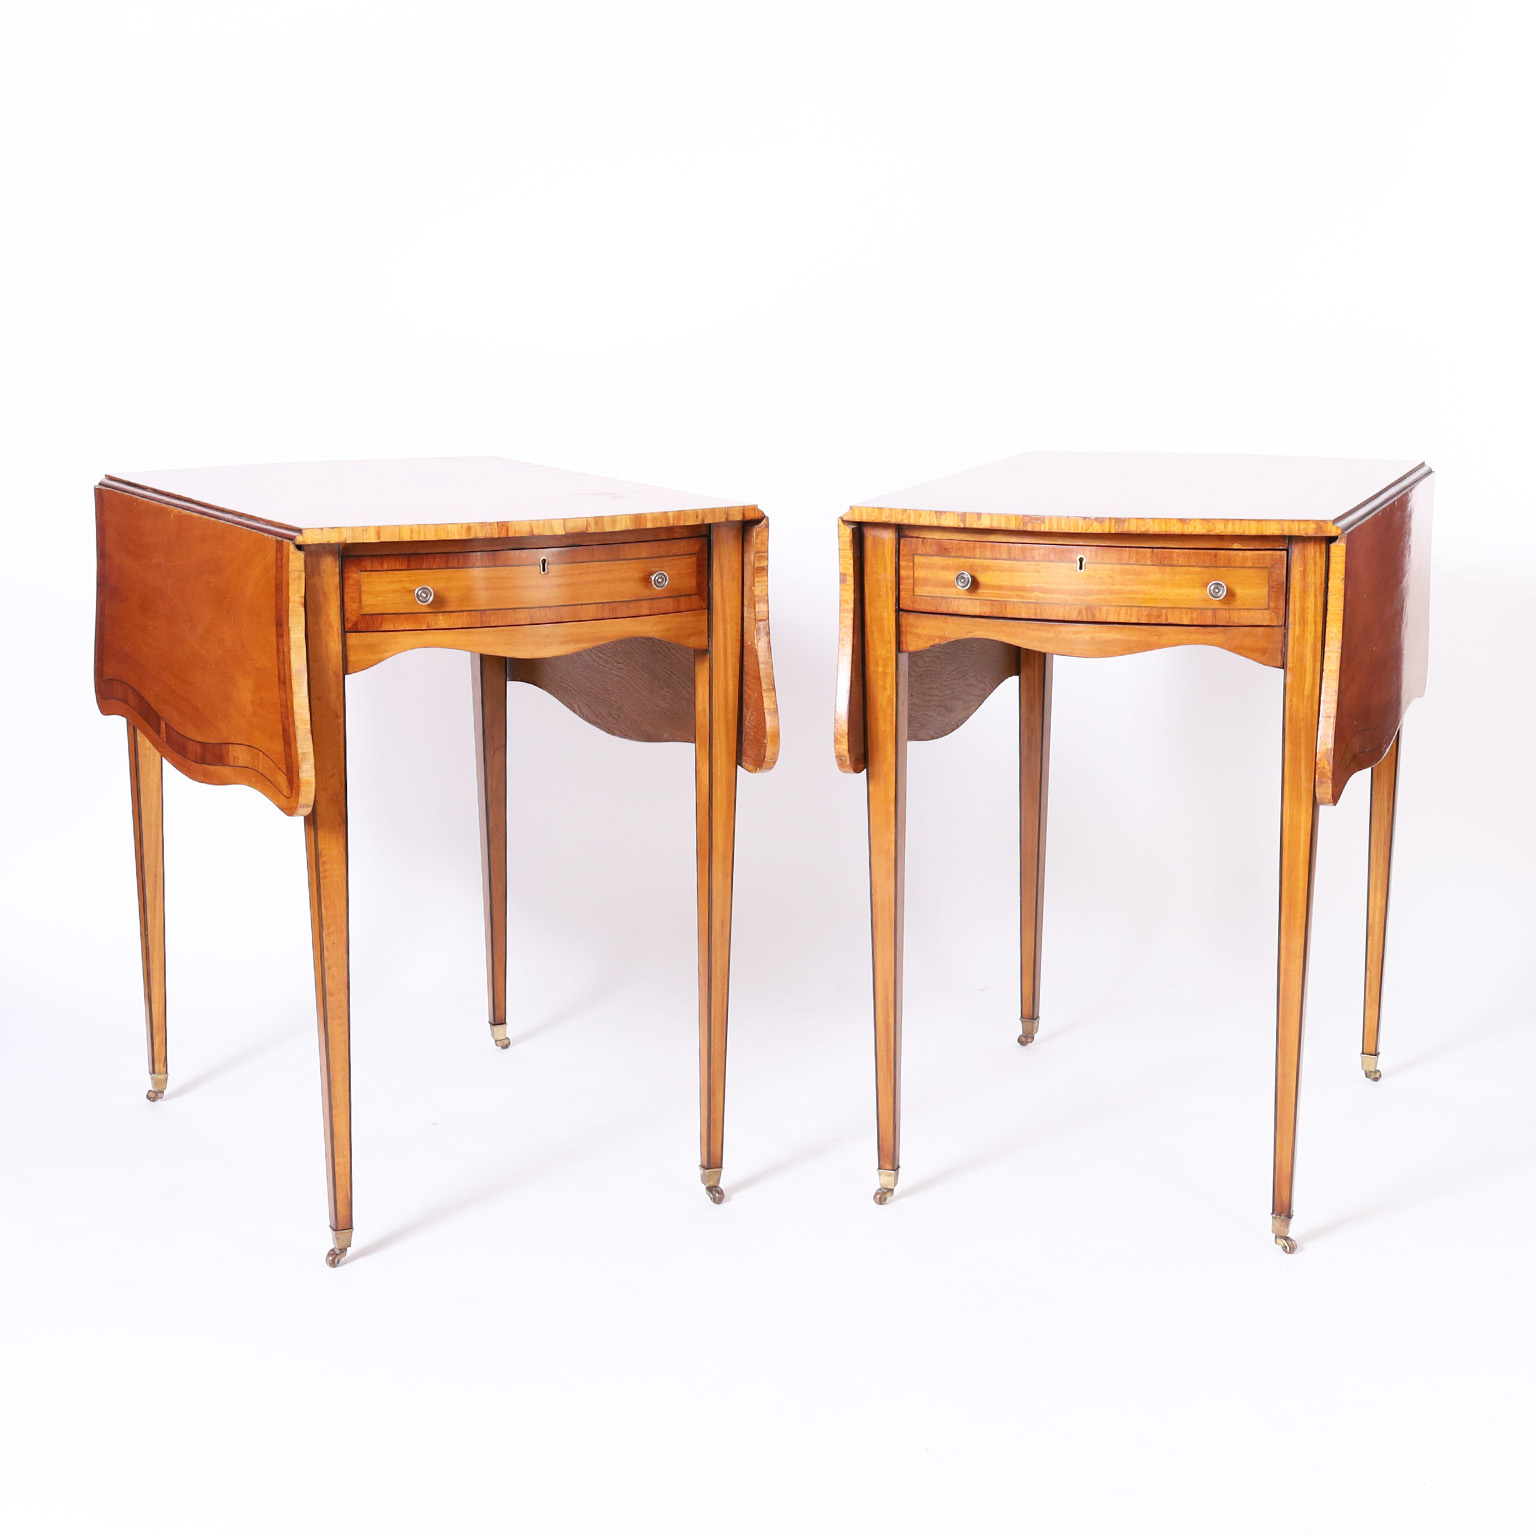 Pair of English George III Style Pembroke or Drop Leaf Tables